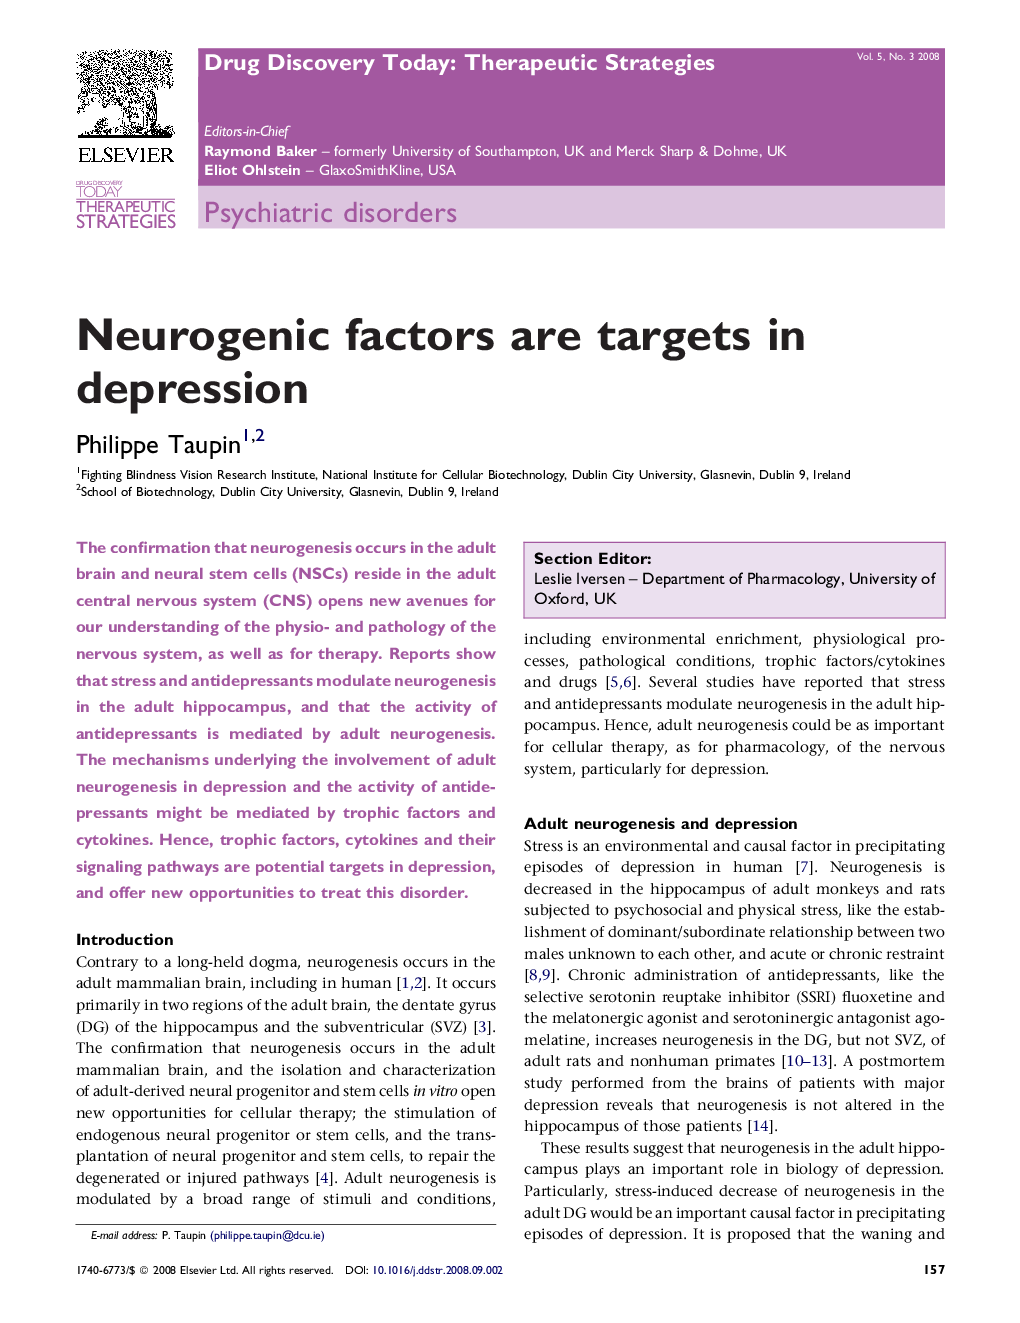 Neurogenic factors are targets in depression